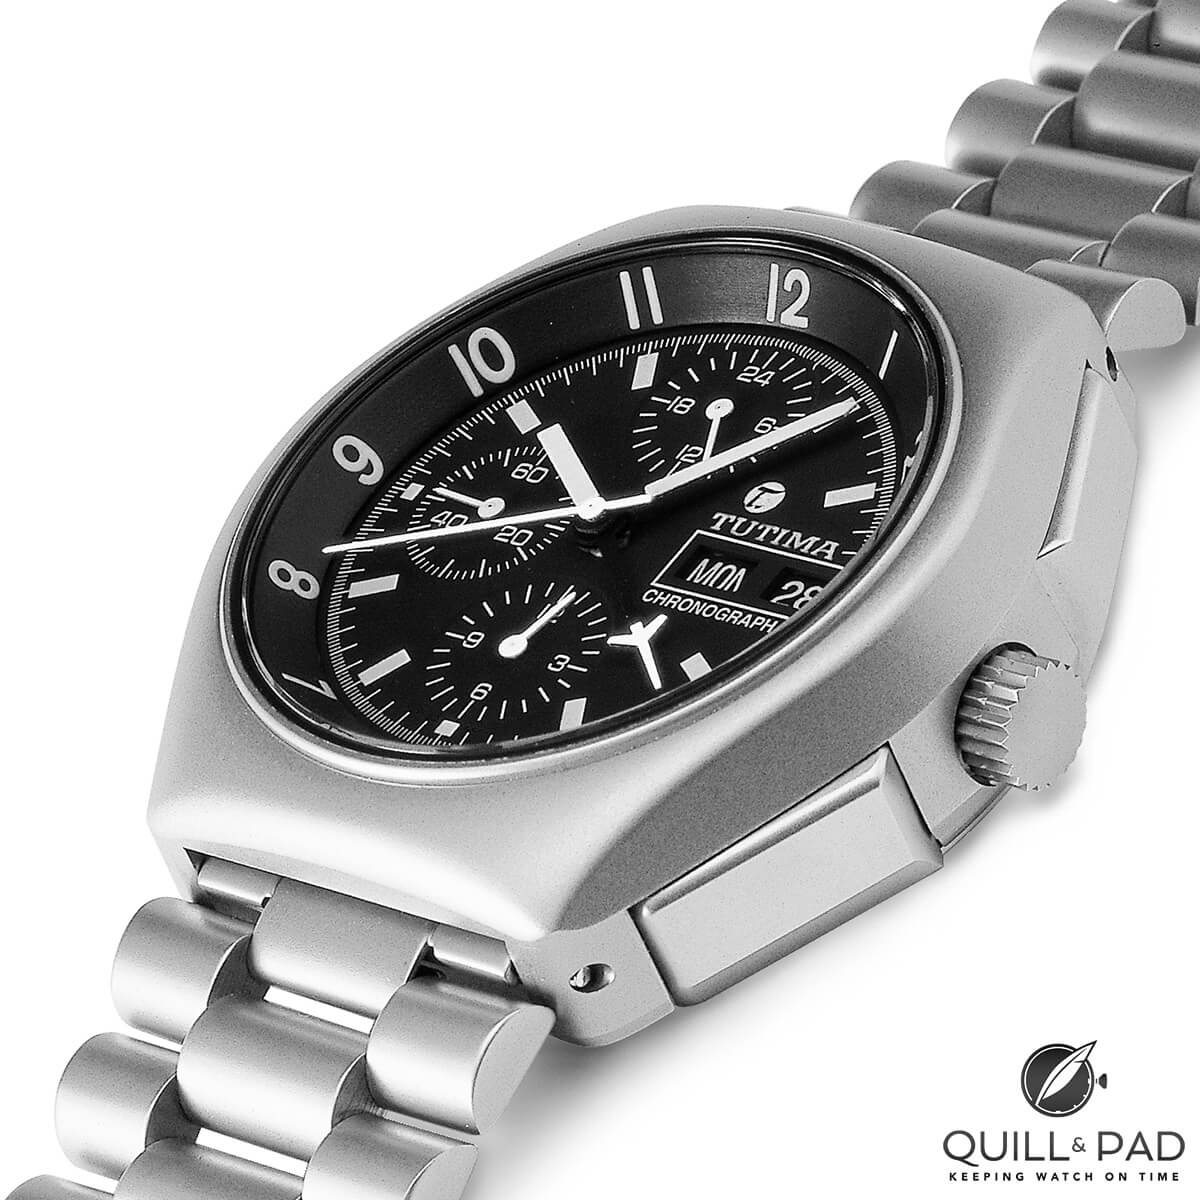 Tutima’s legendary Reference 798, a military chronograph that became the official pilot’s watch of NATO in 1984